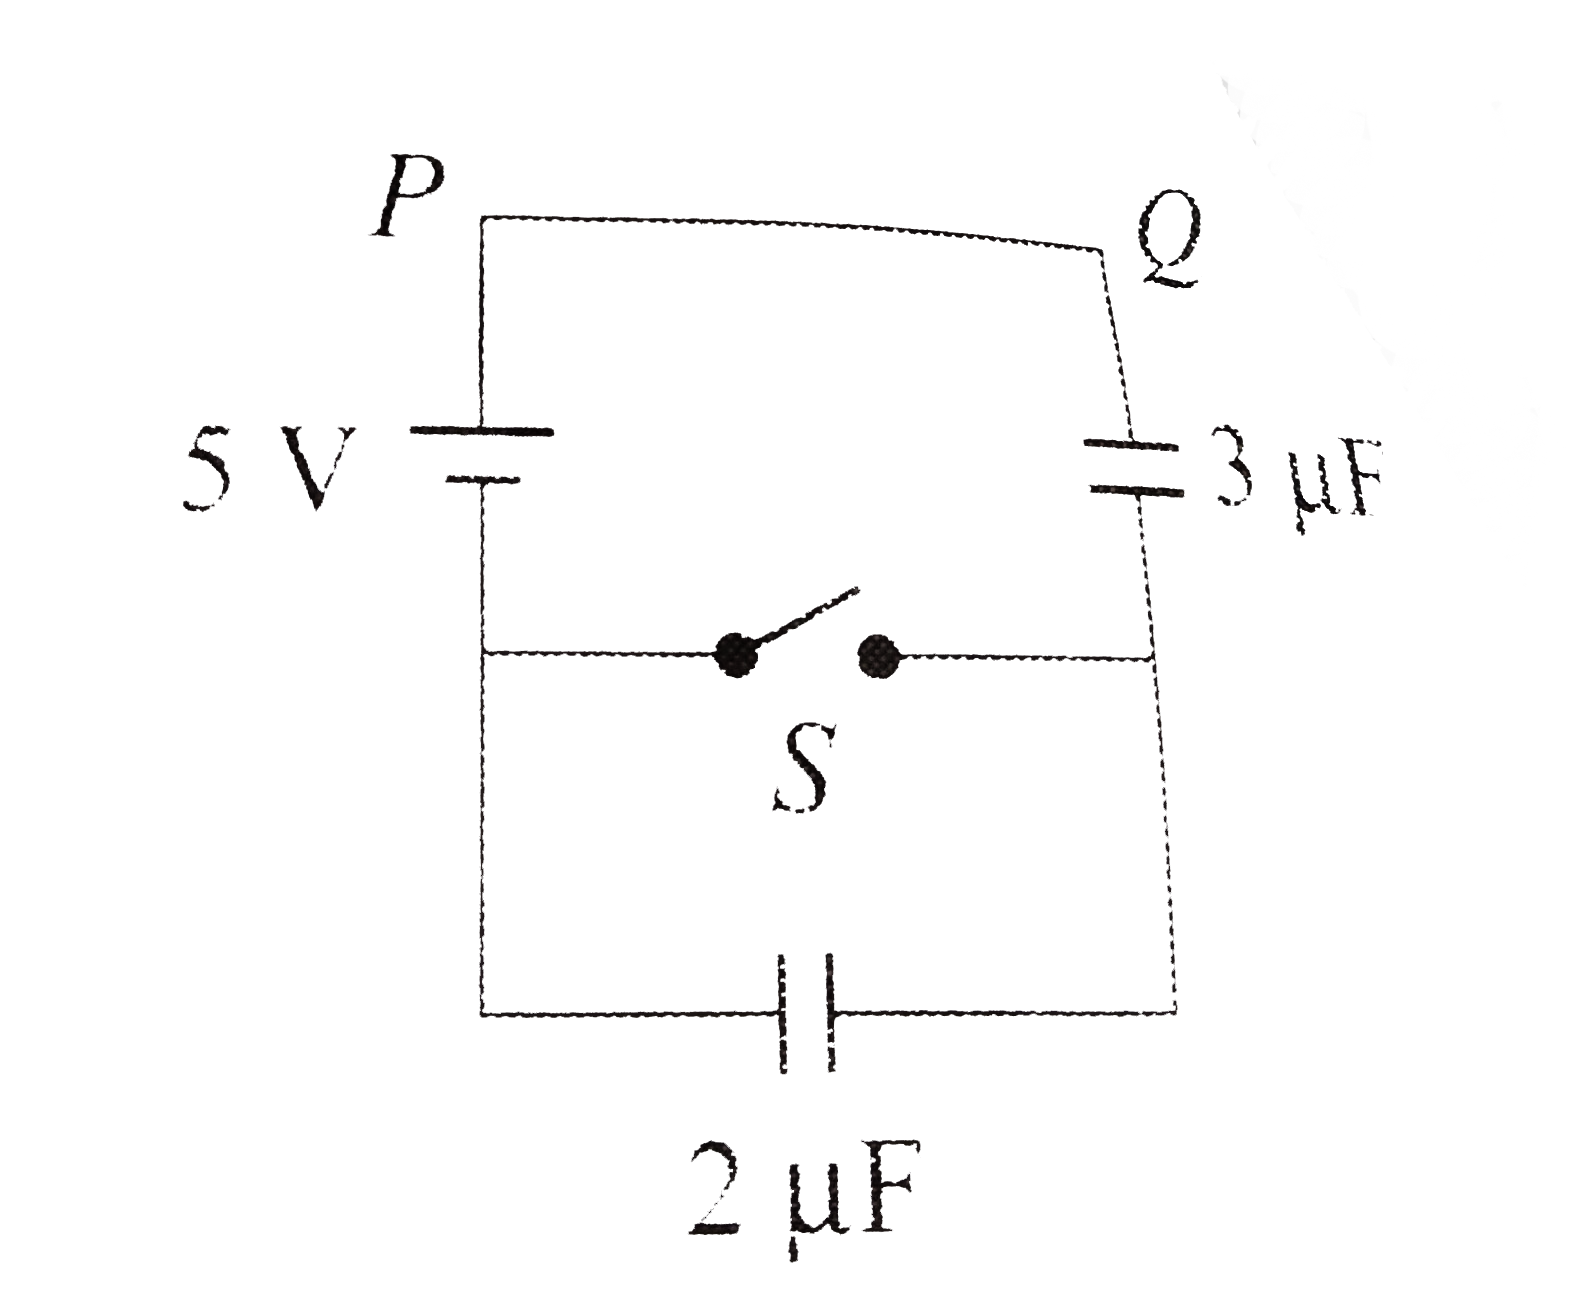 In fig. A2.27, the charge that flows from P to Q when the switch S is closed is